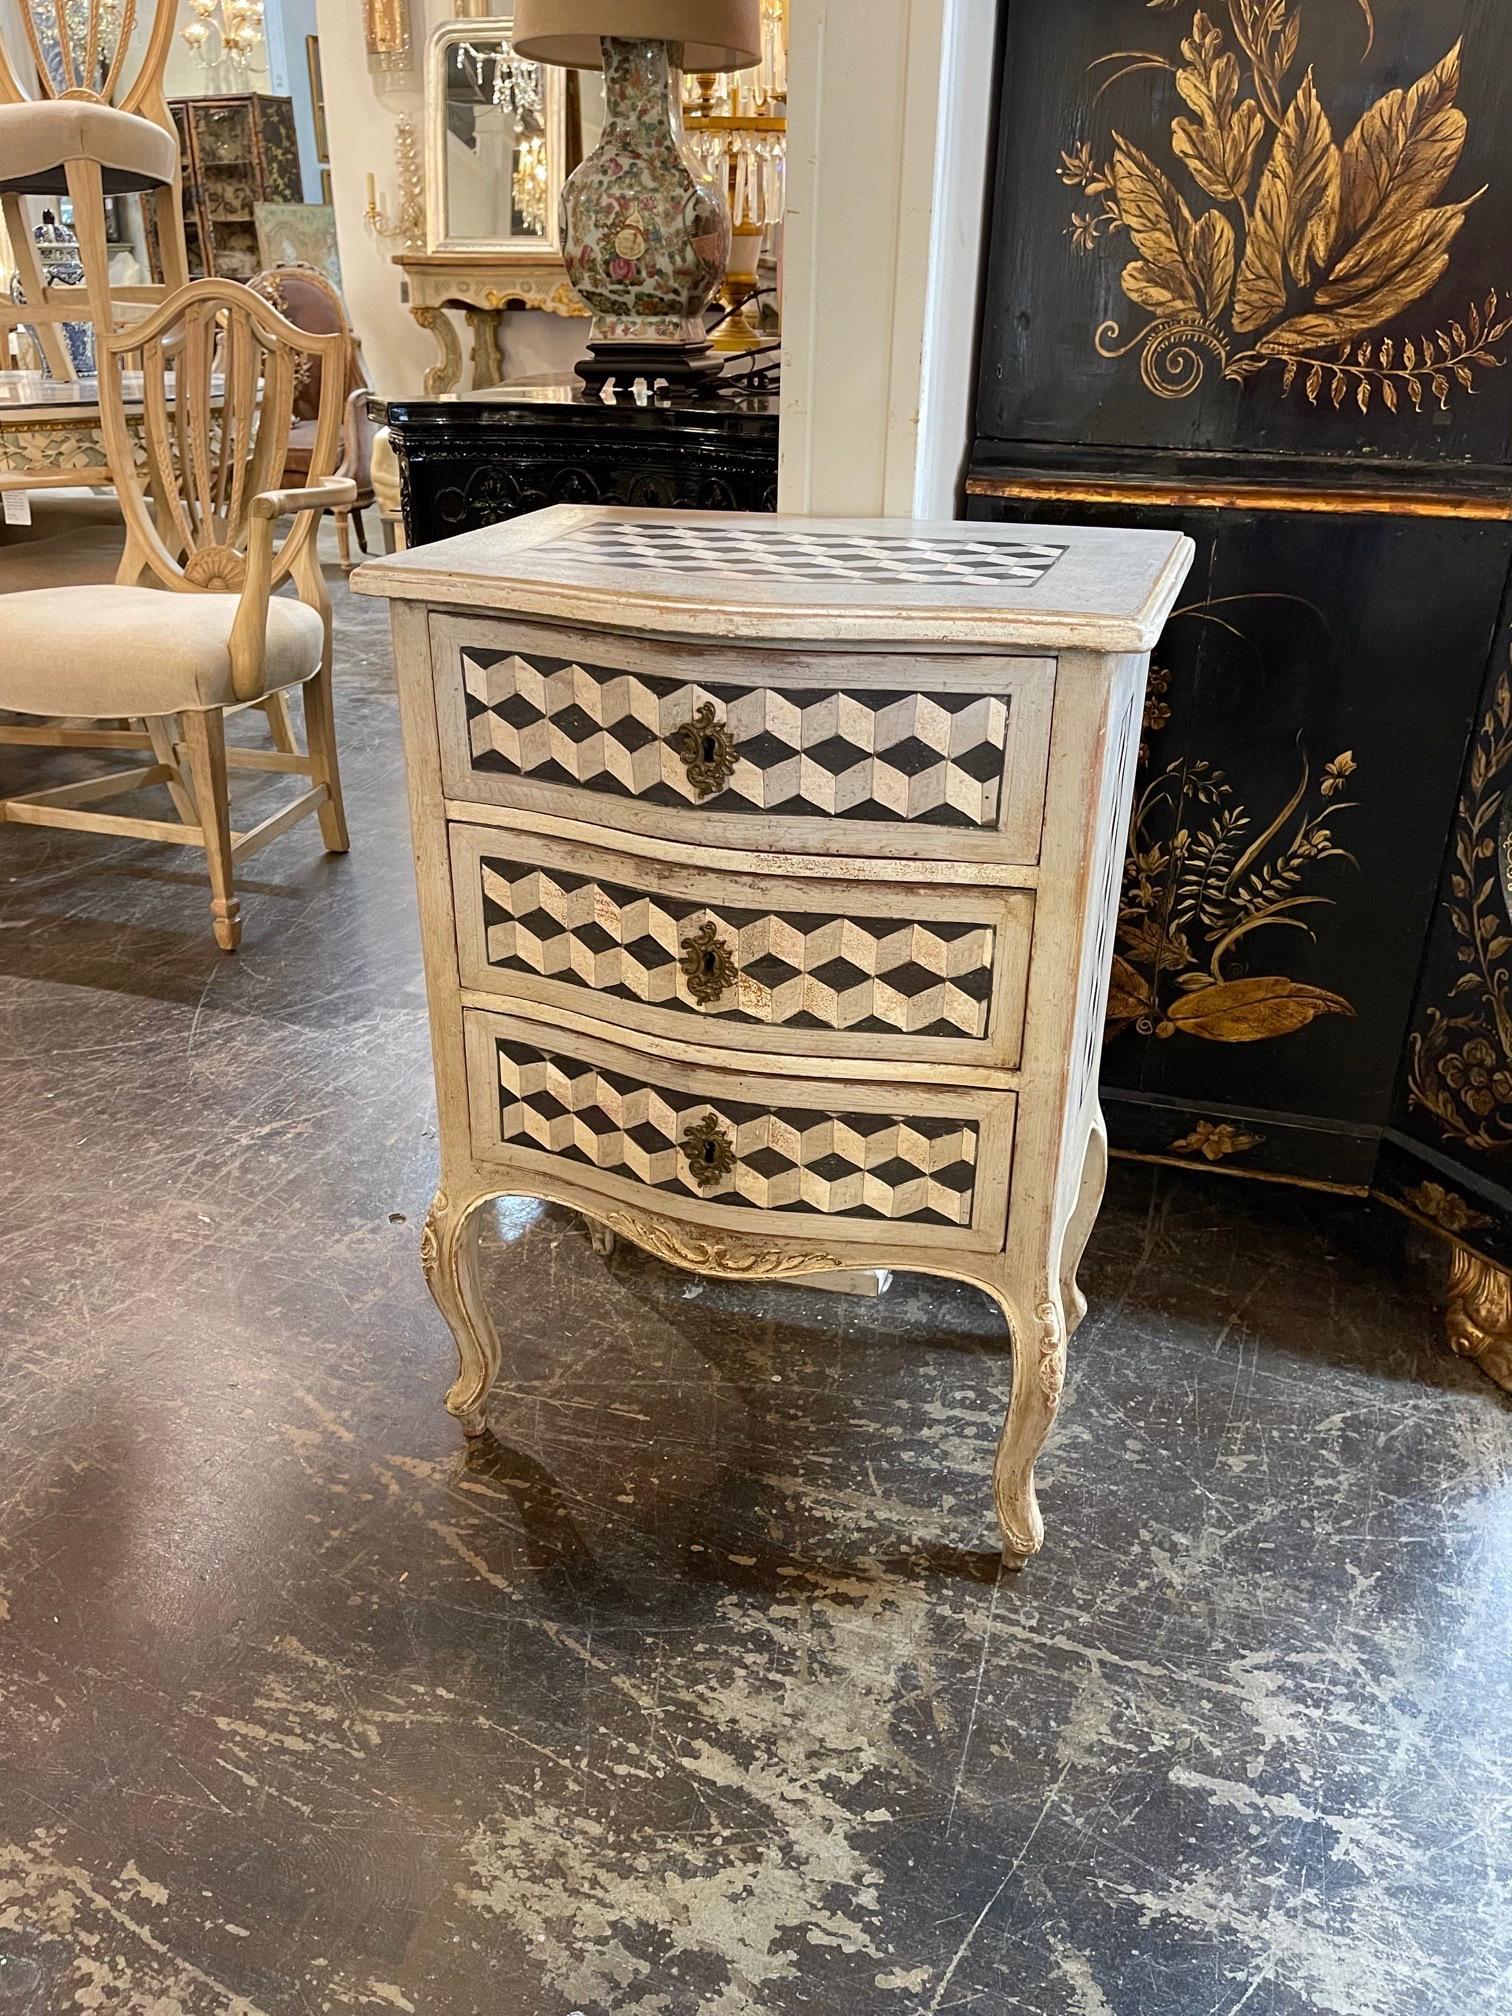 Stylish vintage Italian painted side table with a geo-metric design. Nice curved shaped and beautiful decorative design. A great accent piece!